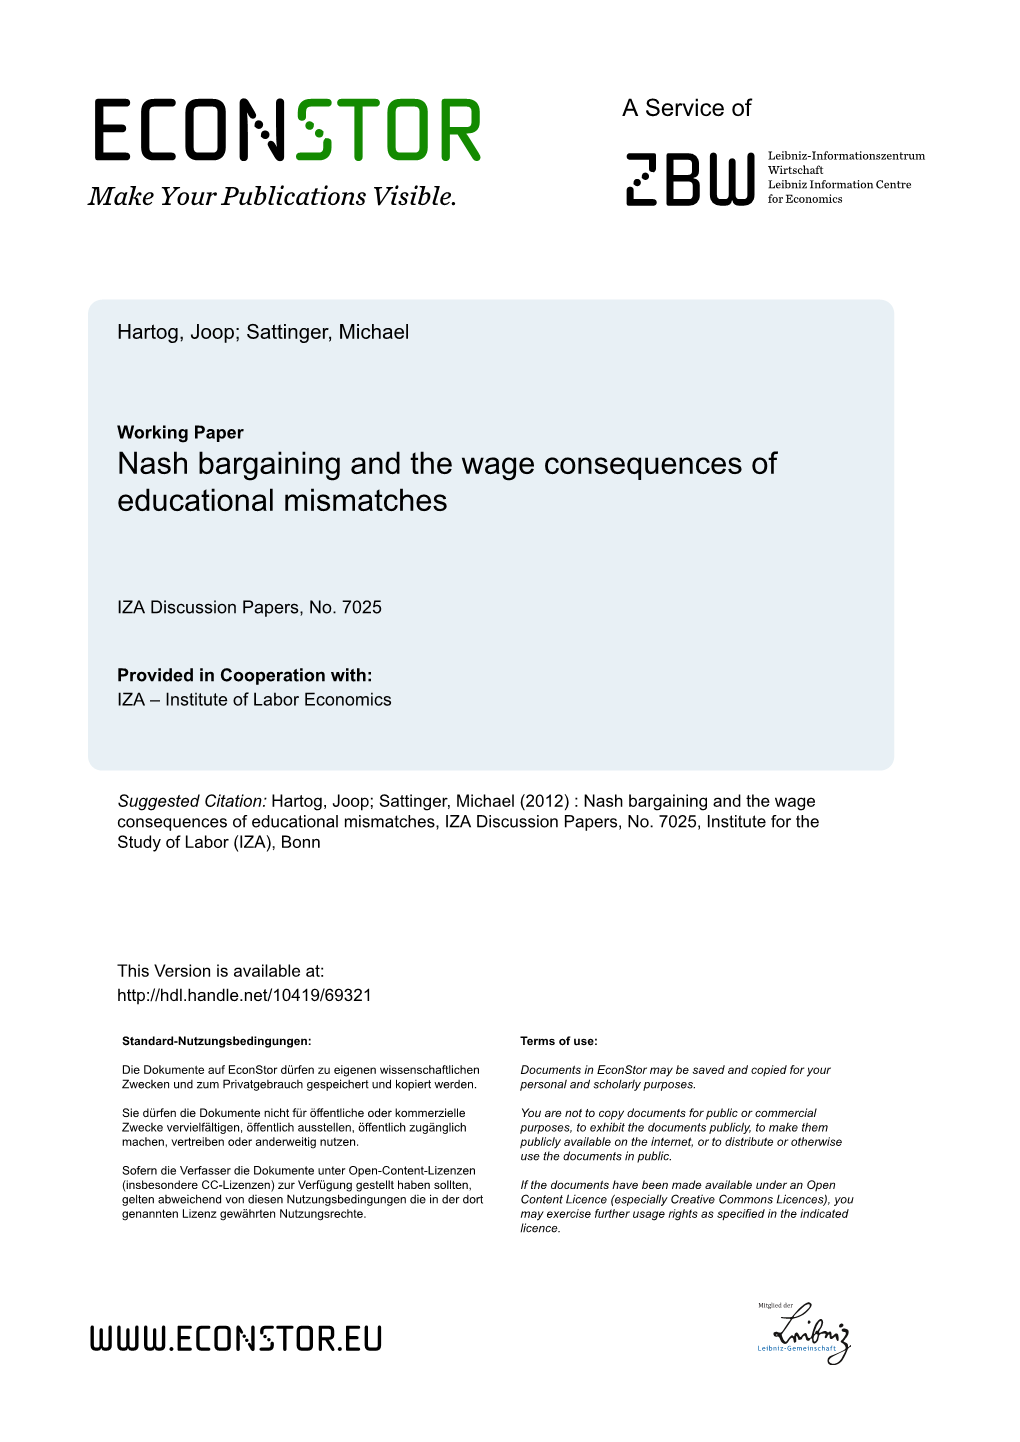 Nash Bargaining and the Wage Consequences of Educational Mismatches